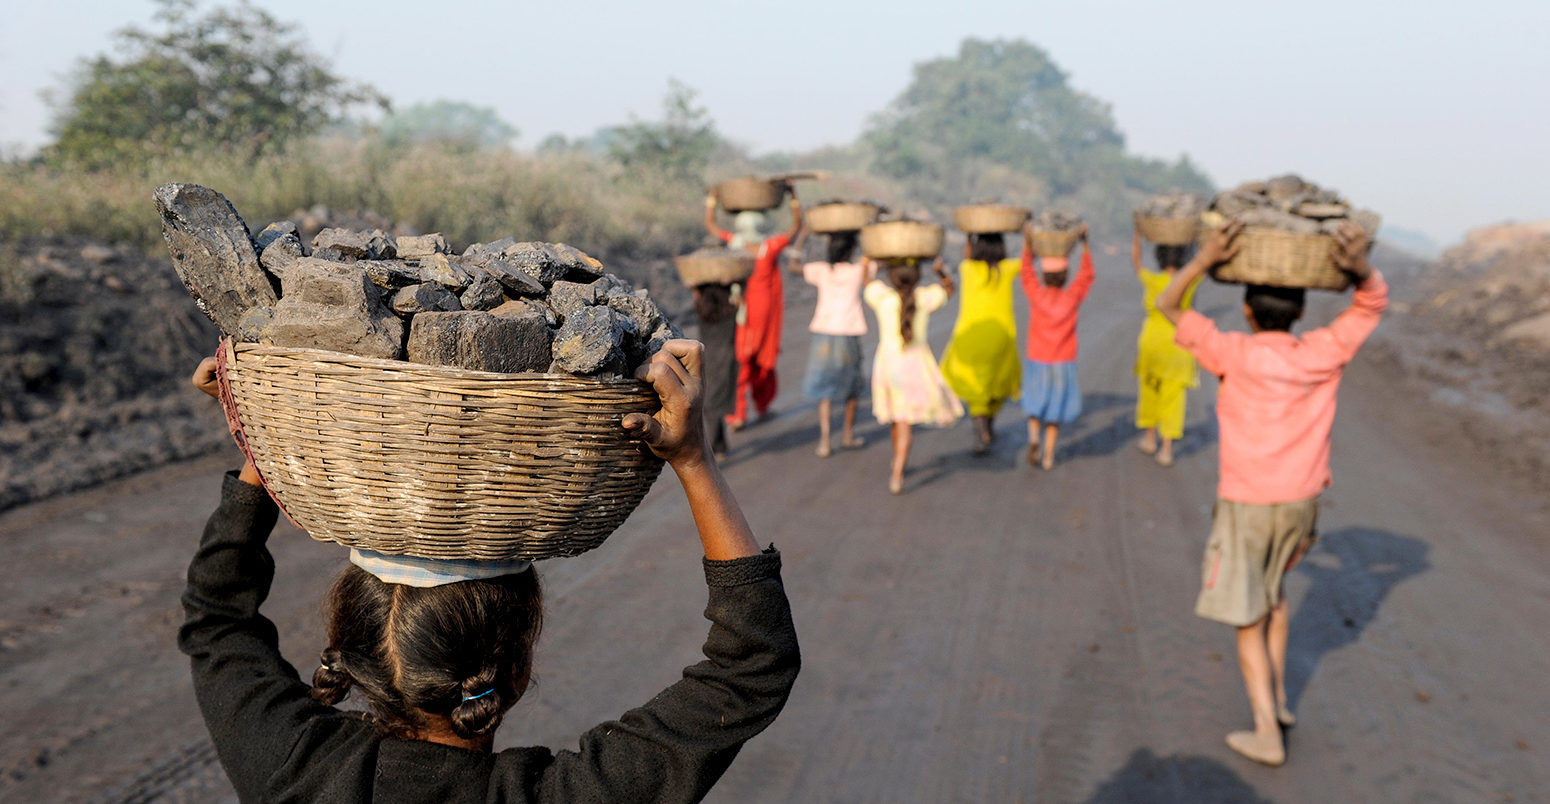 Coal remains are collected to be sold at a local market, Jharkhand, India. Credit: Joerg Boethling / Alamy Stock Photo. HN5KMY